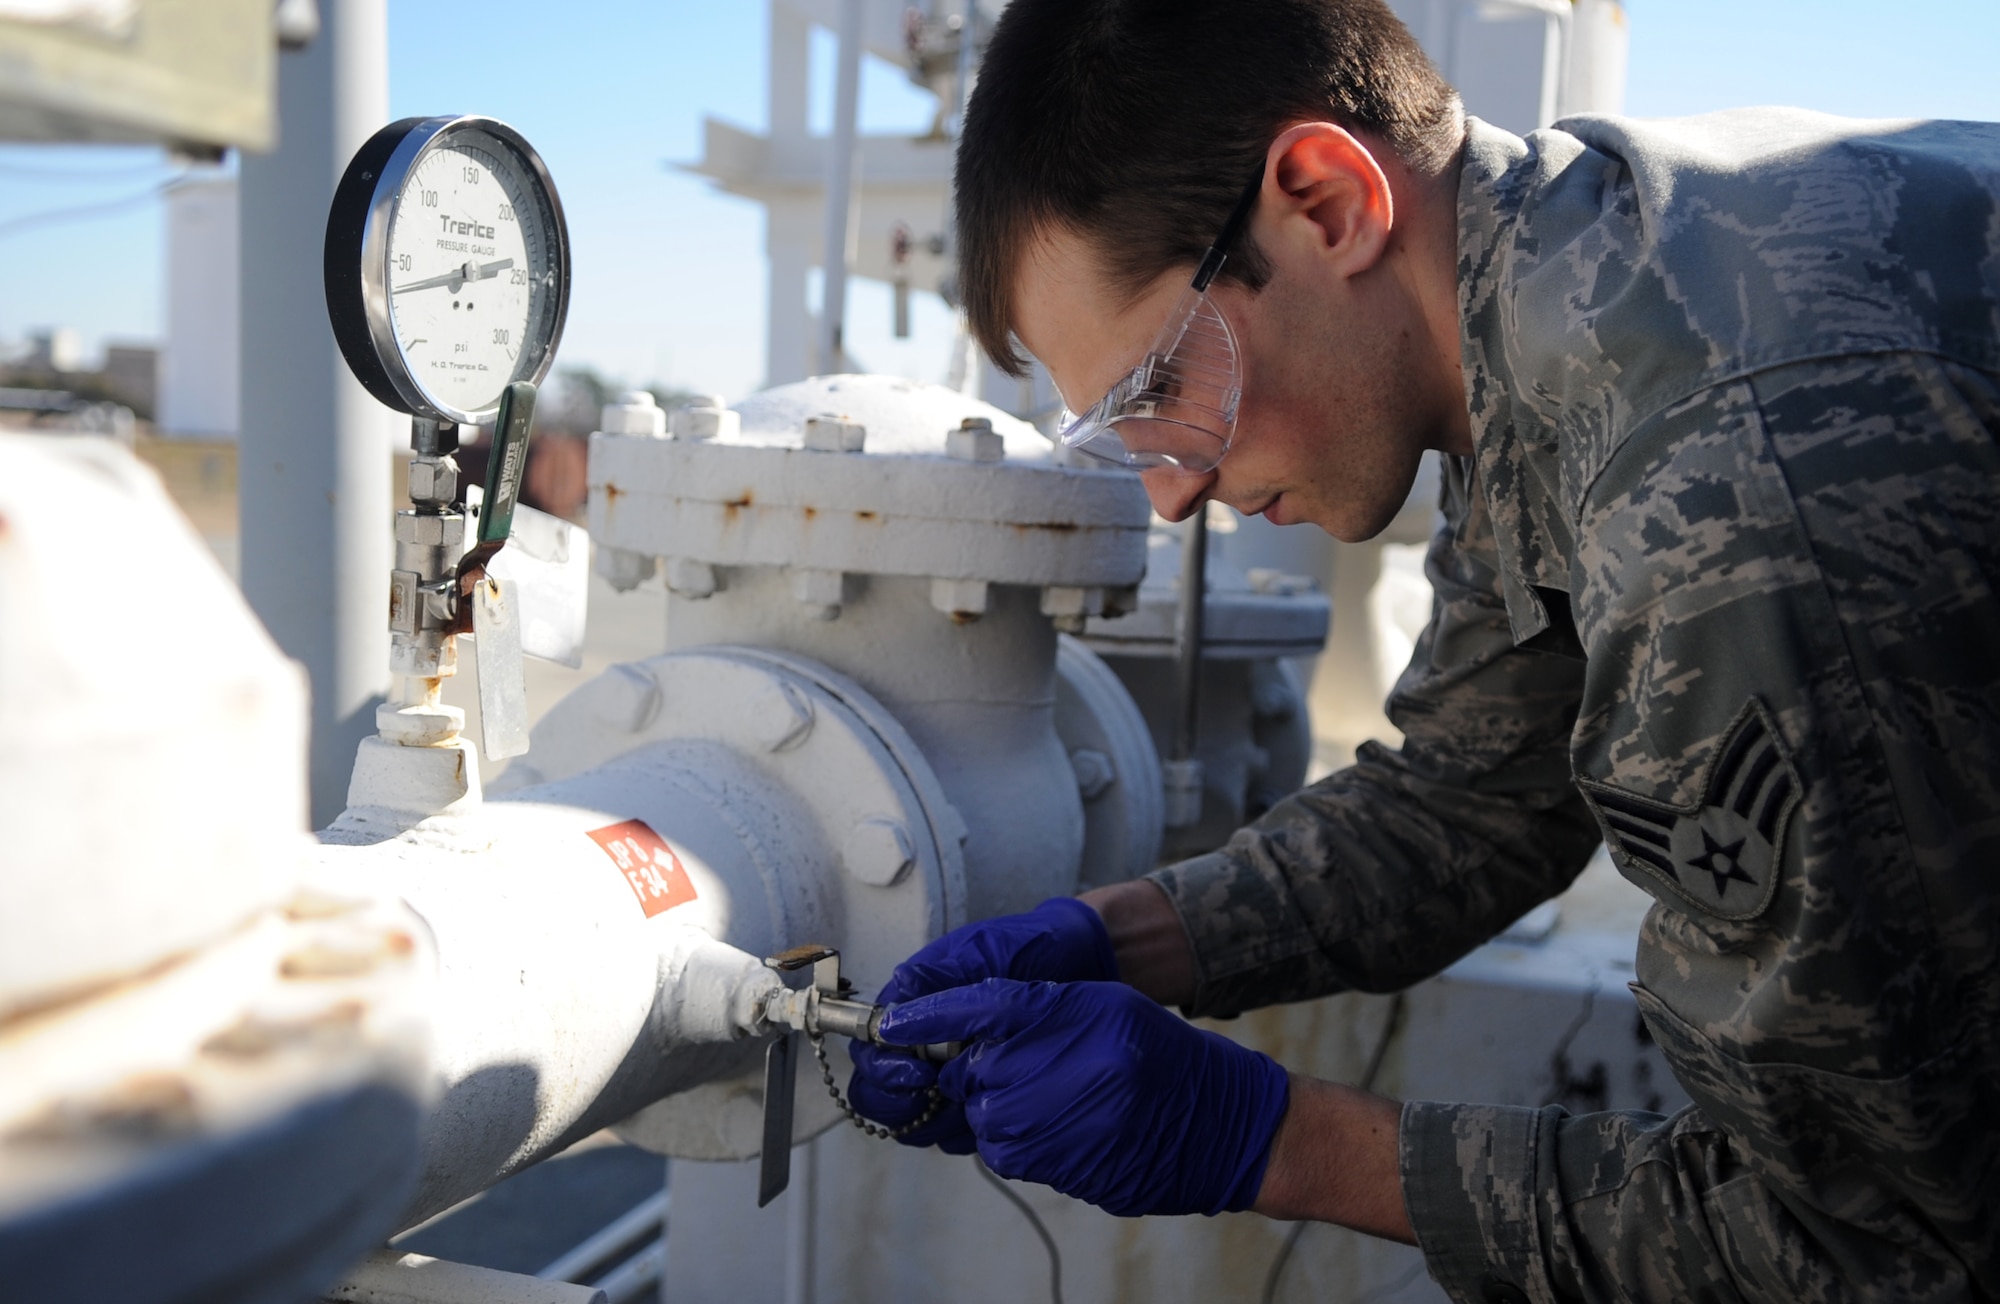 Senior Airman Noah Lazurka takes a sample from a fuel tank Feb. 11, 2015, at Seymour Johnson Air Force Base, N.C. Petroleum, oil and lubricants Airmen perform regular checks to ensure the quality of the base’s jet and ground fuel. Lazurka is a 4th Logistics Readiness Squadron fuels laboratory technician. (U.S. Air Force photo/Senior Airman Ashley J. Thum)